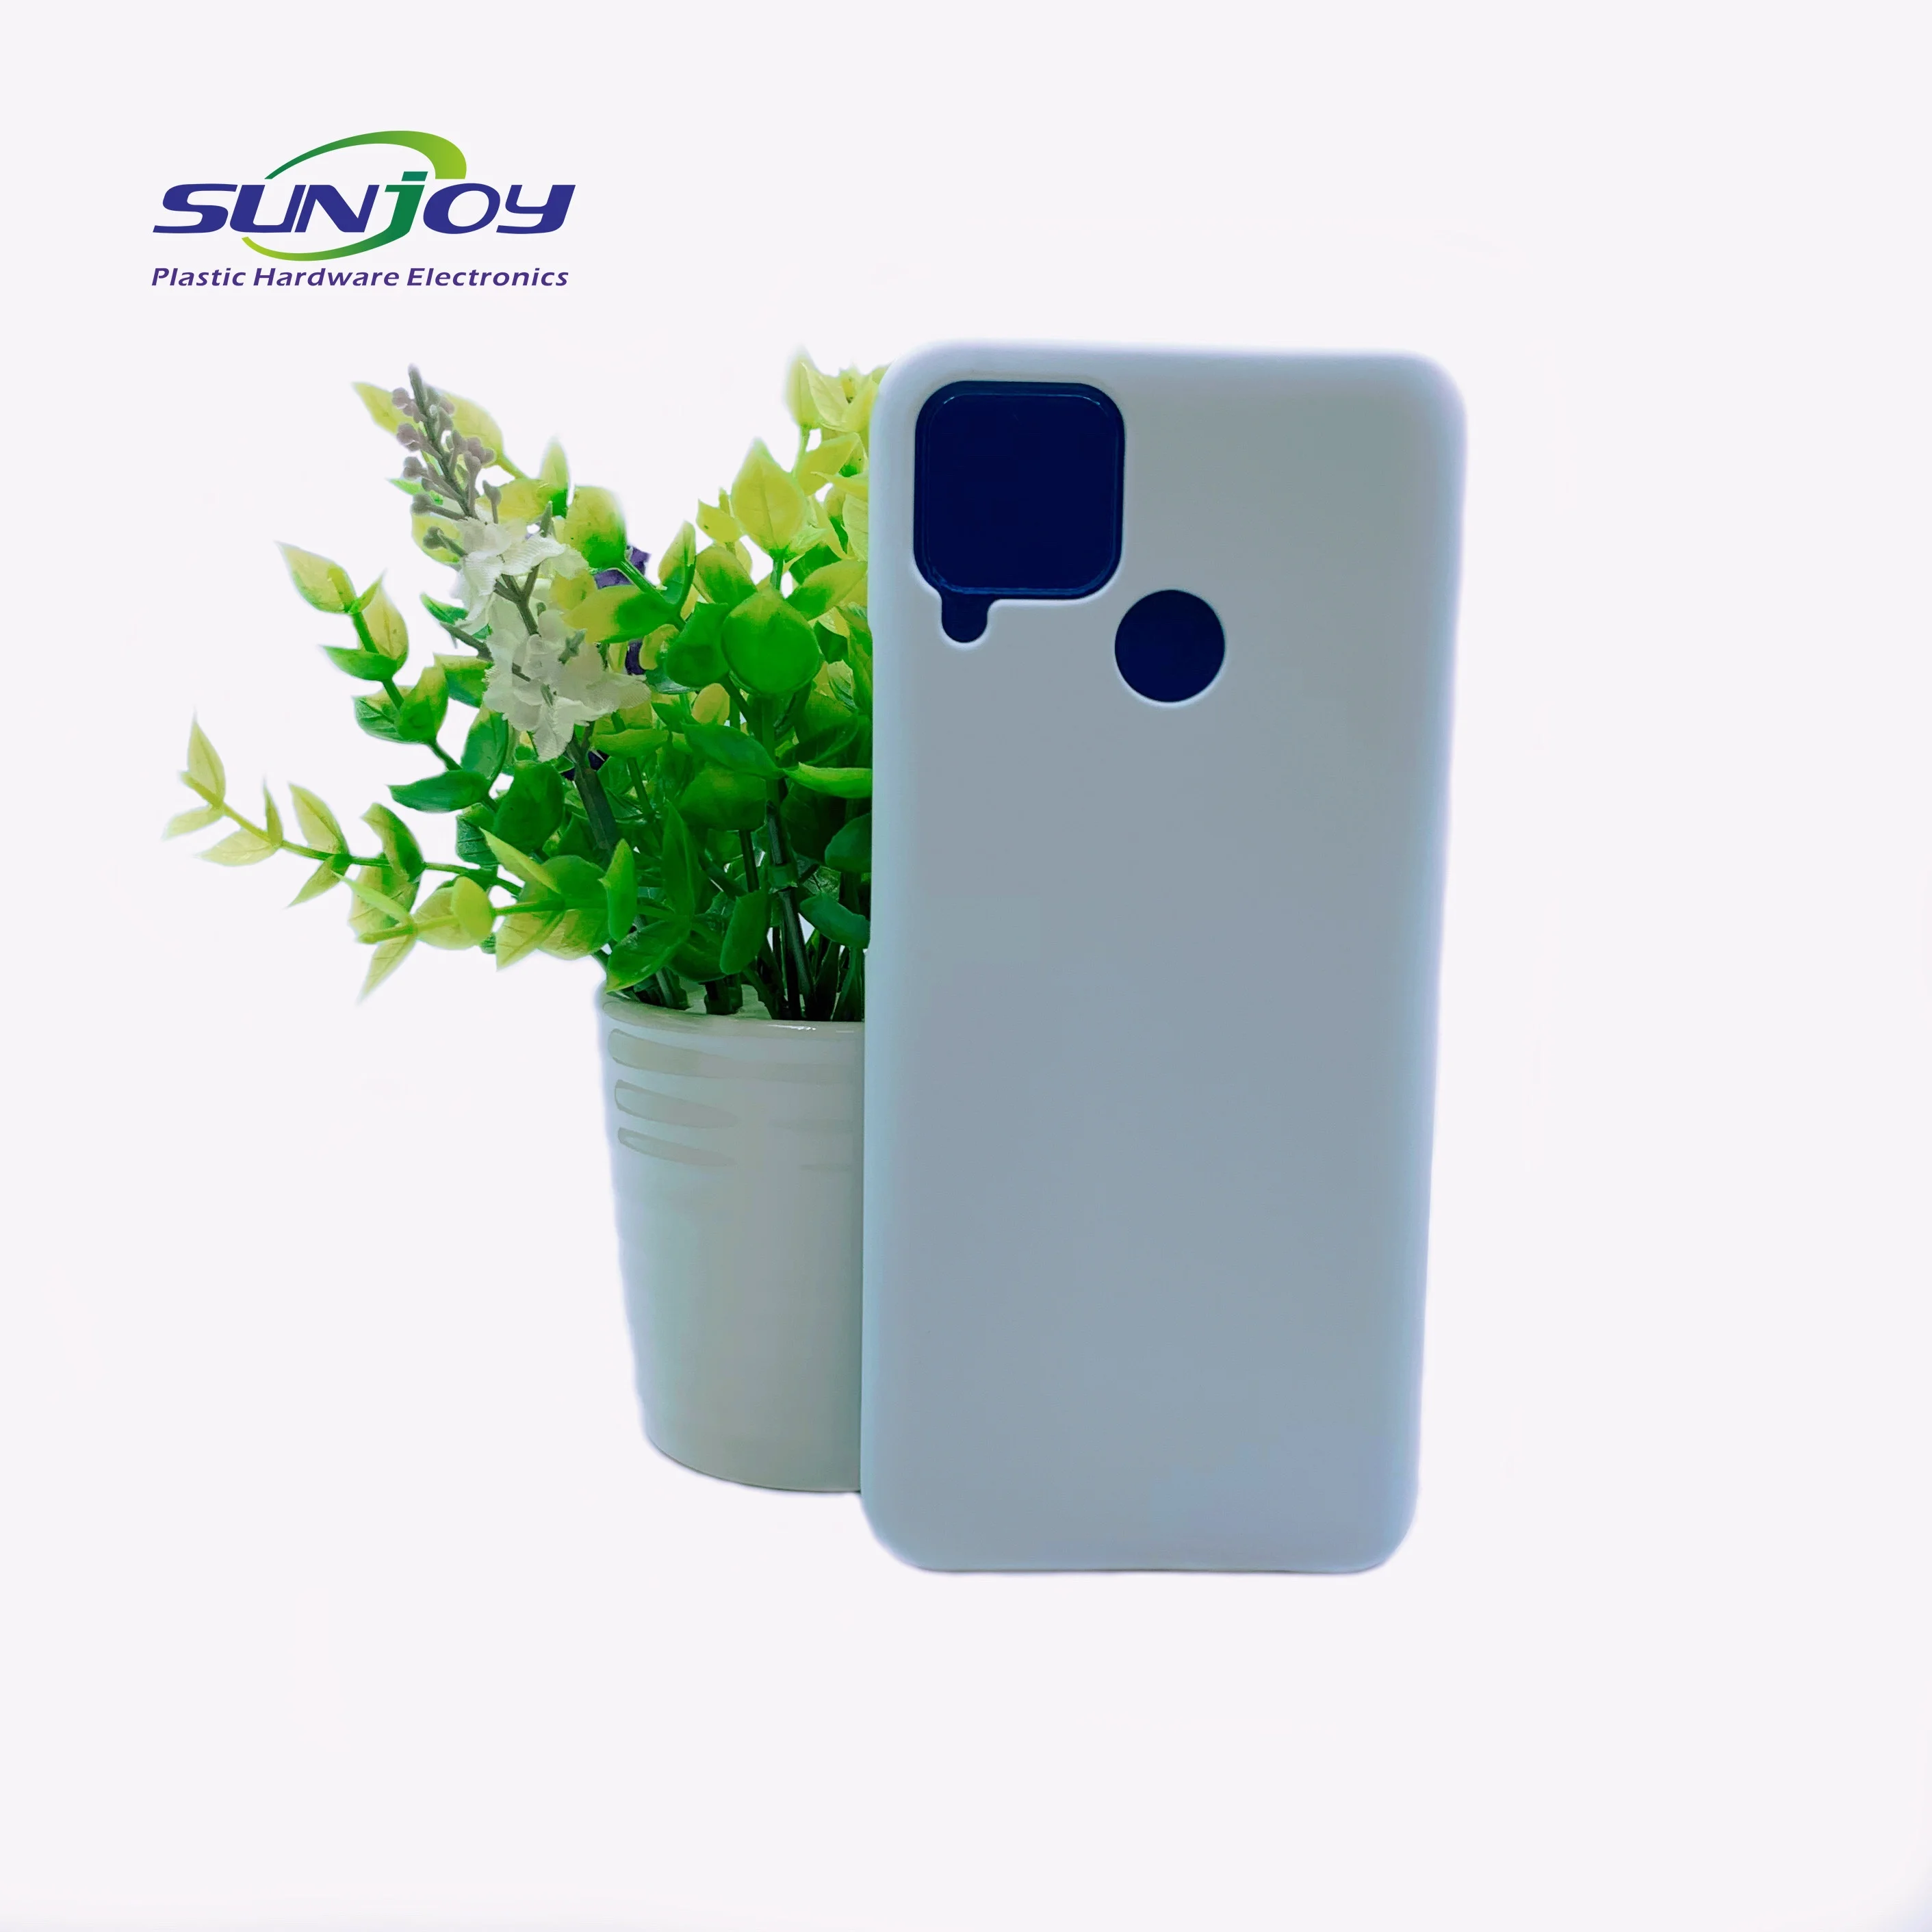 

High Quality 3D Sublimation Case Mold for heat transfer printing For oppo realme c11 metal jig